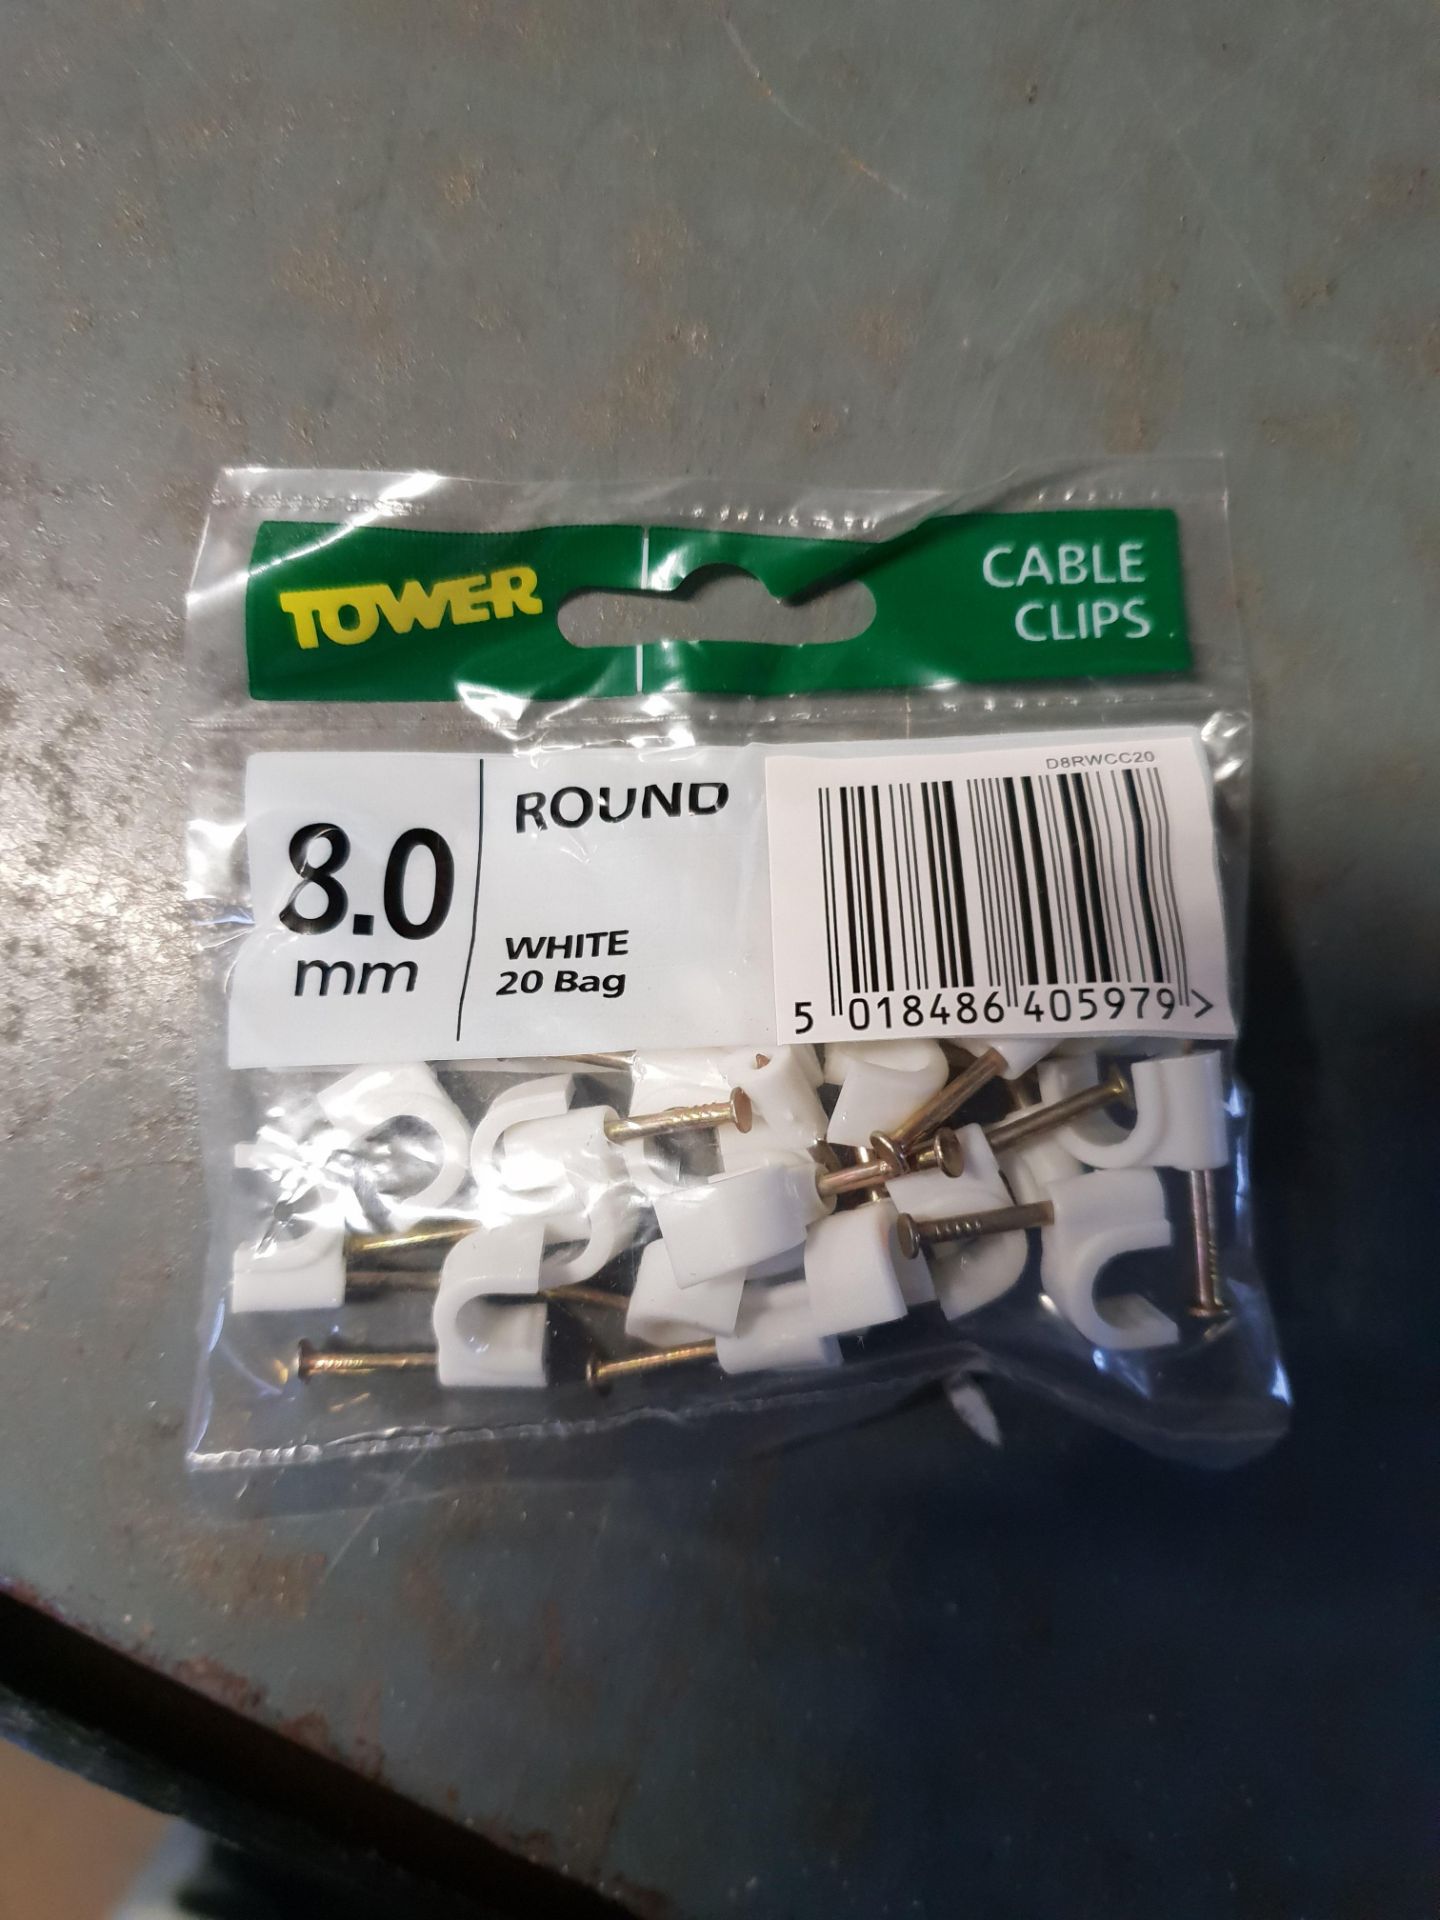 40 packs - 8mm cable clips